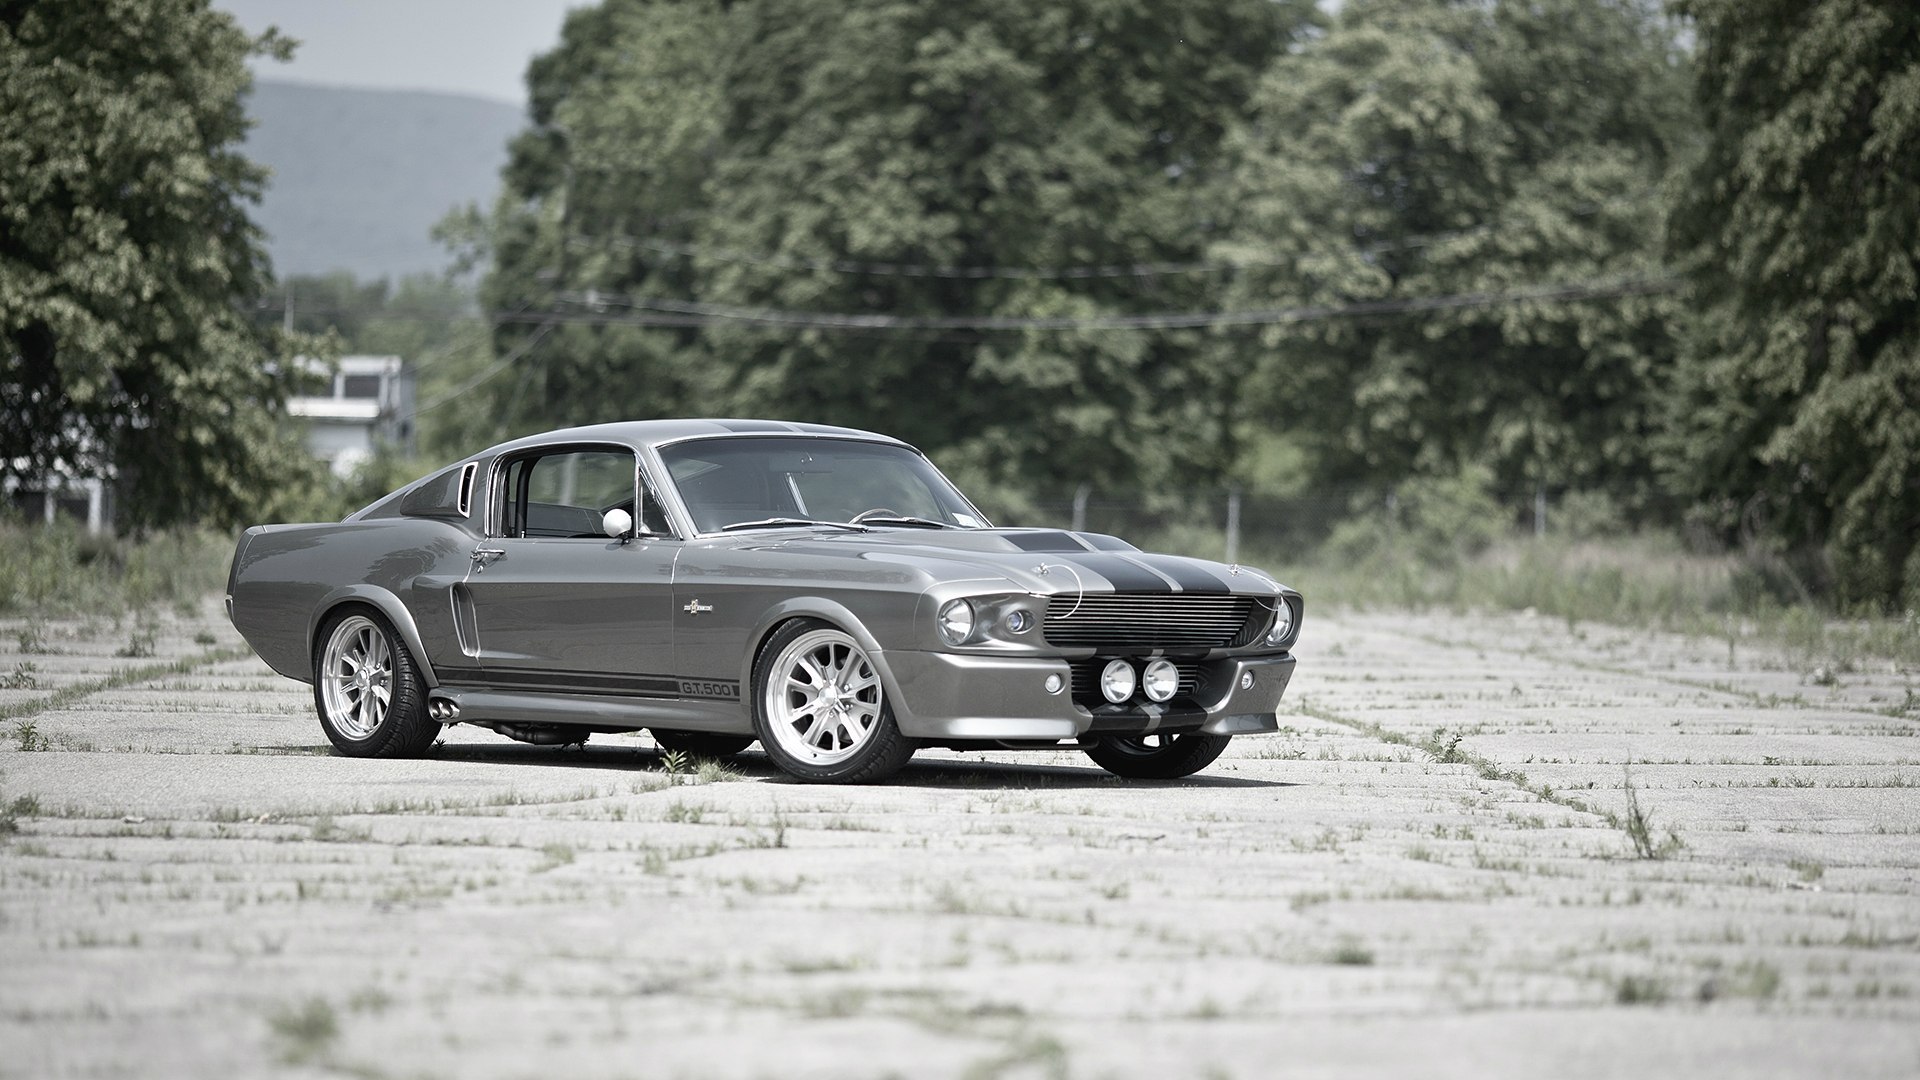 Ford Mustang Shelby Gt500 Vehicles Wallpaper